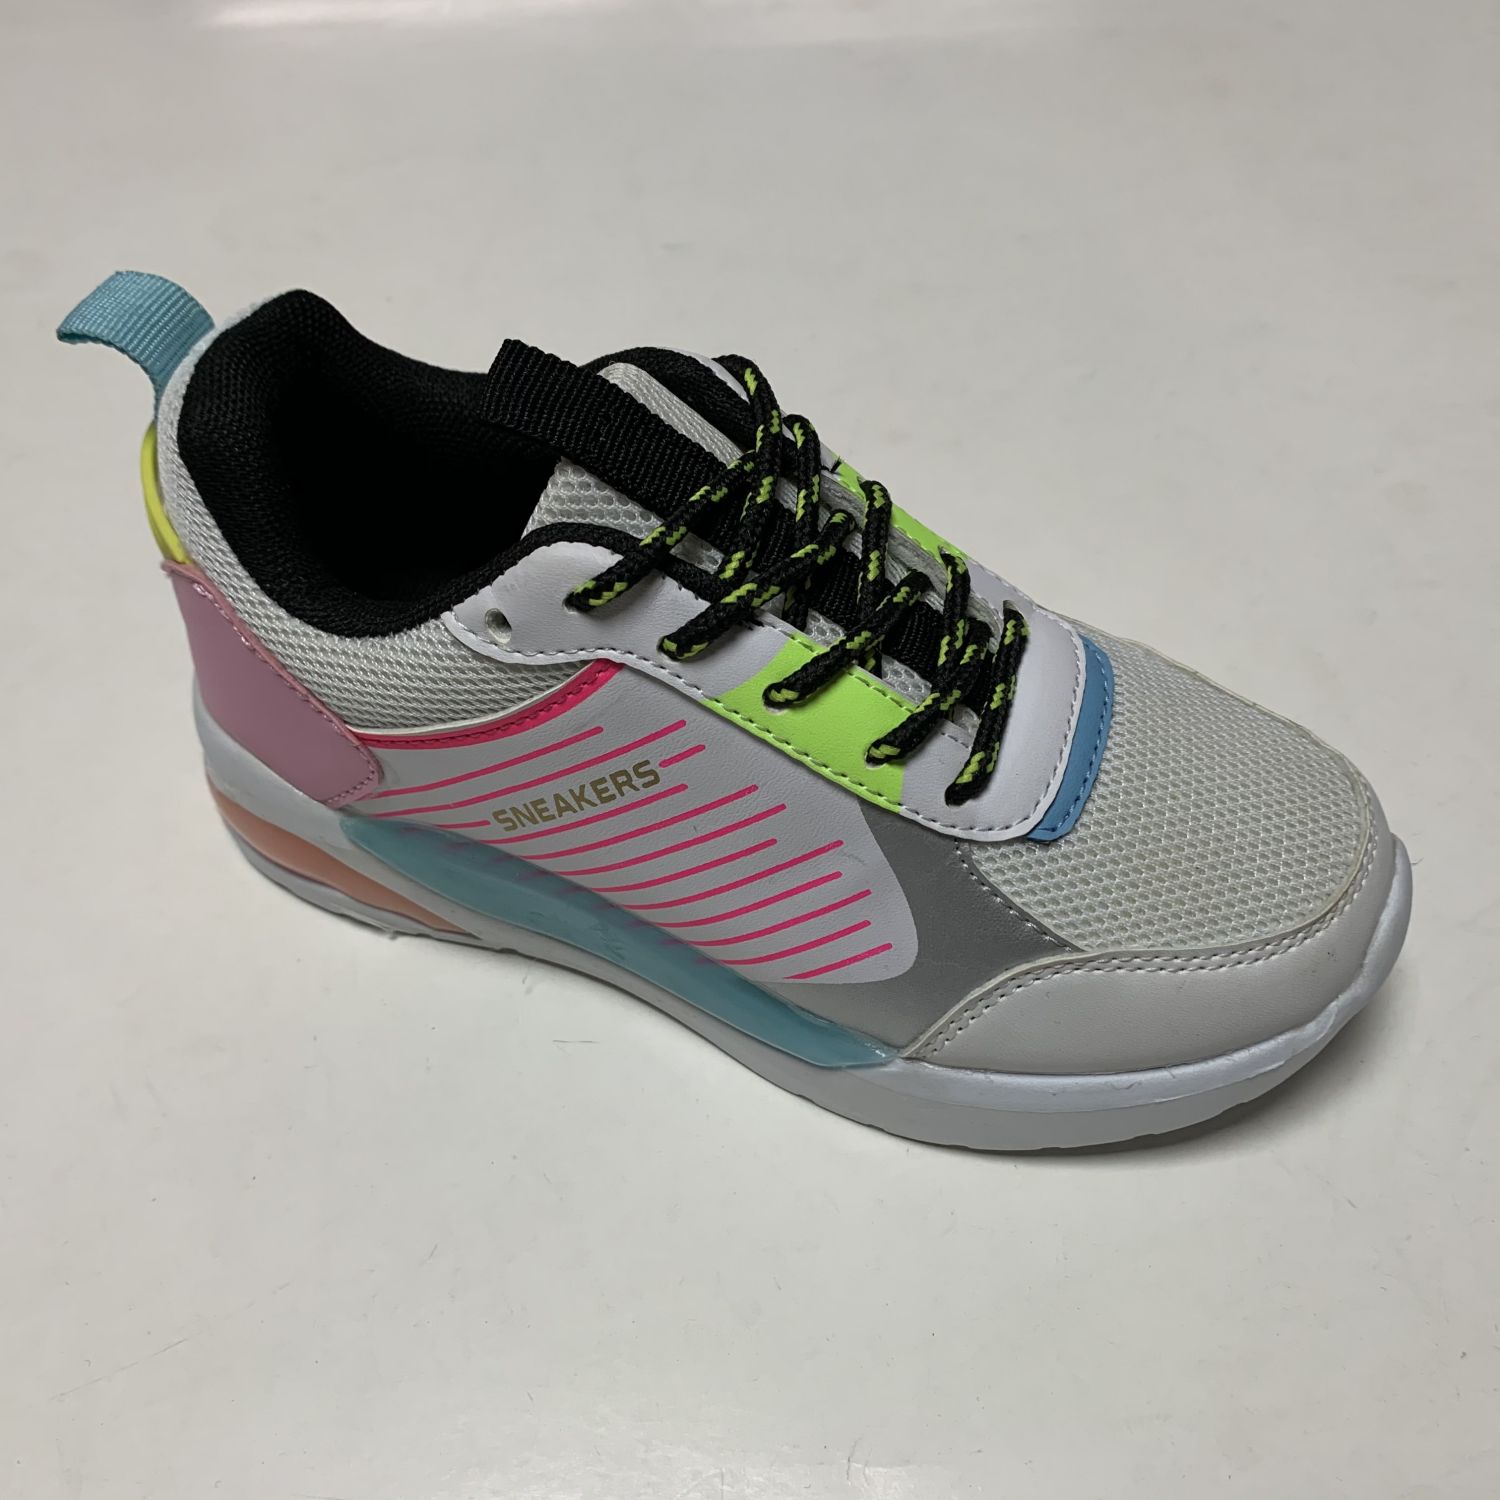 Girl's Boys Fashionable Running Shoes Kid Breathable Non-Slip Tennis Shoes Outdoor Sports Shoes Children's 